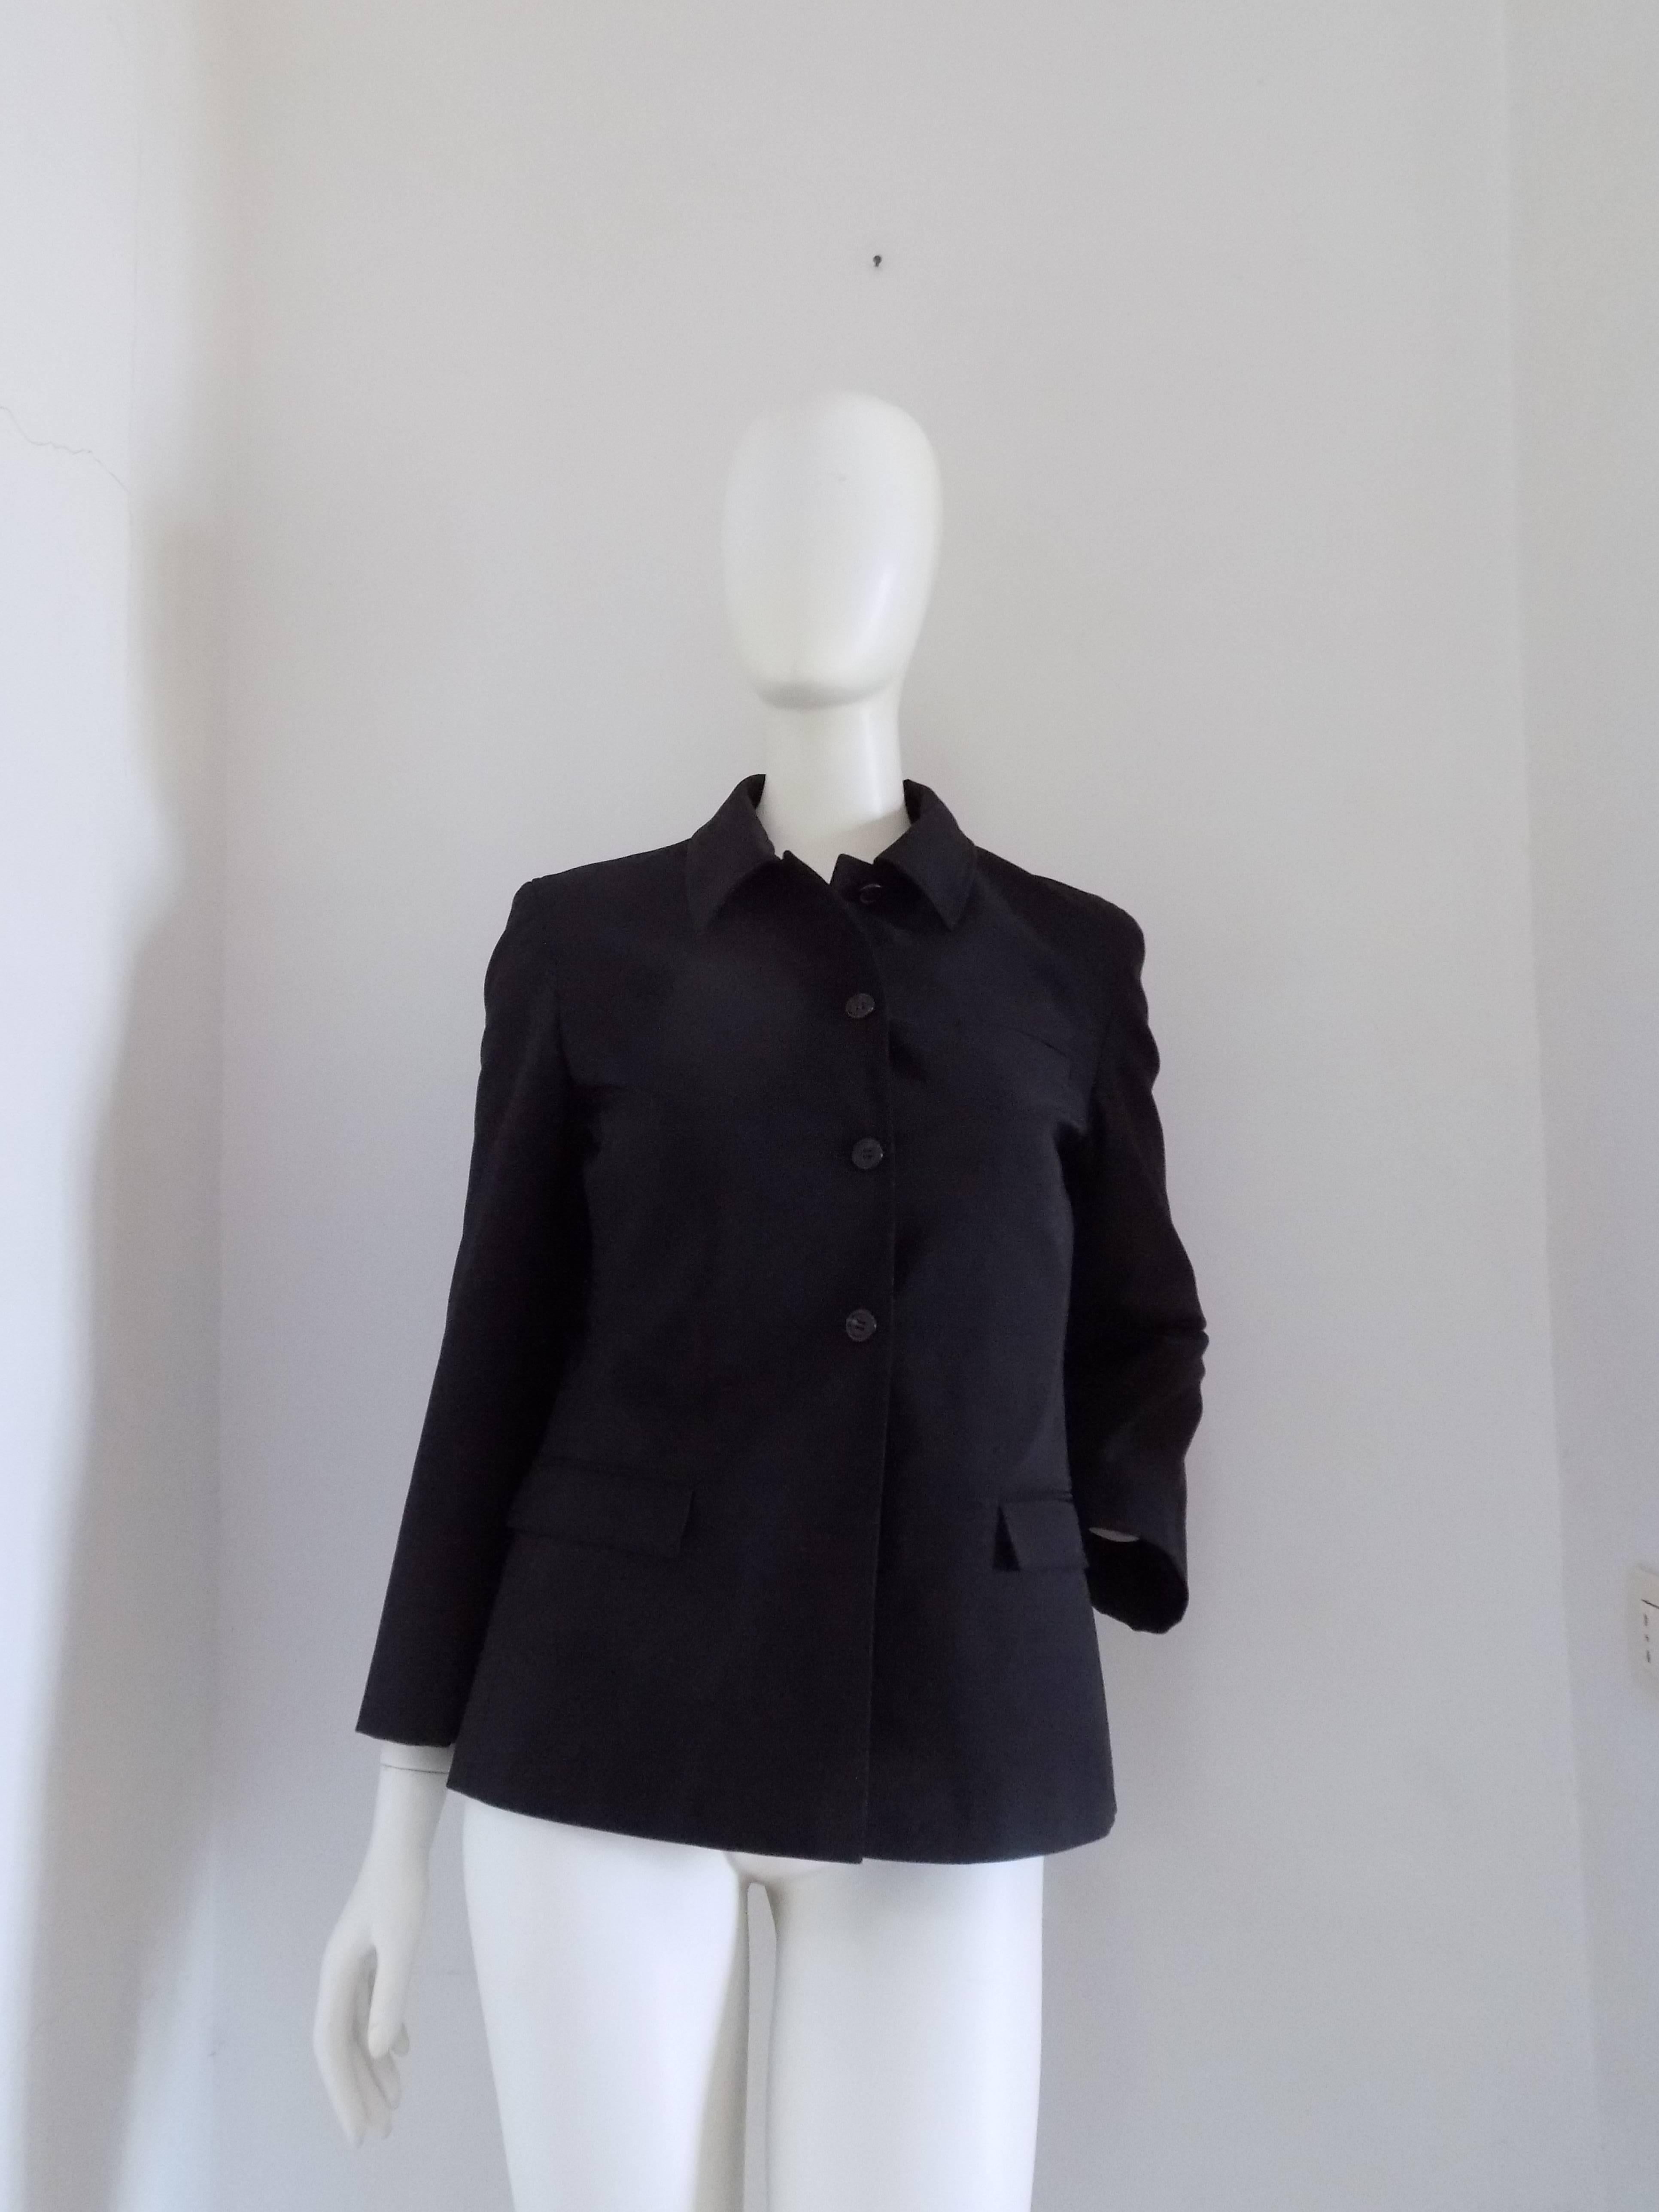 Black Jacket totally made in italy in italian size range 40
Composition: 90% polyester 10% spandex